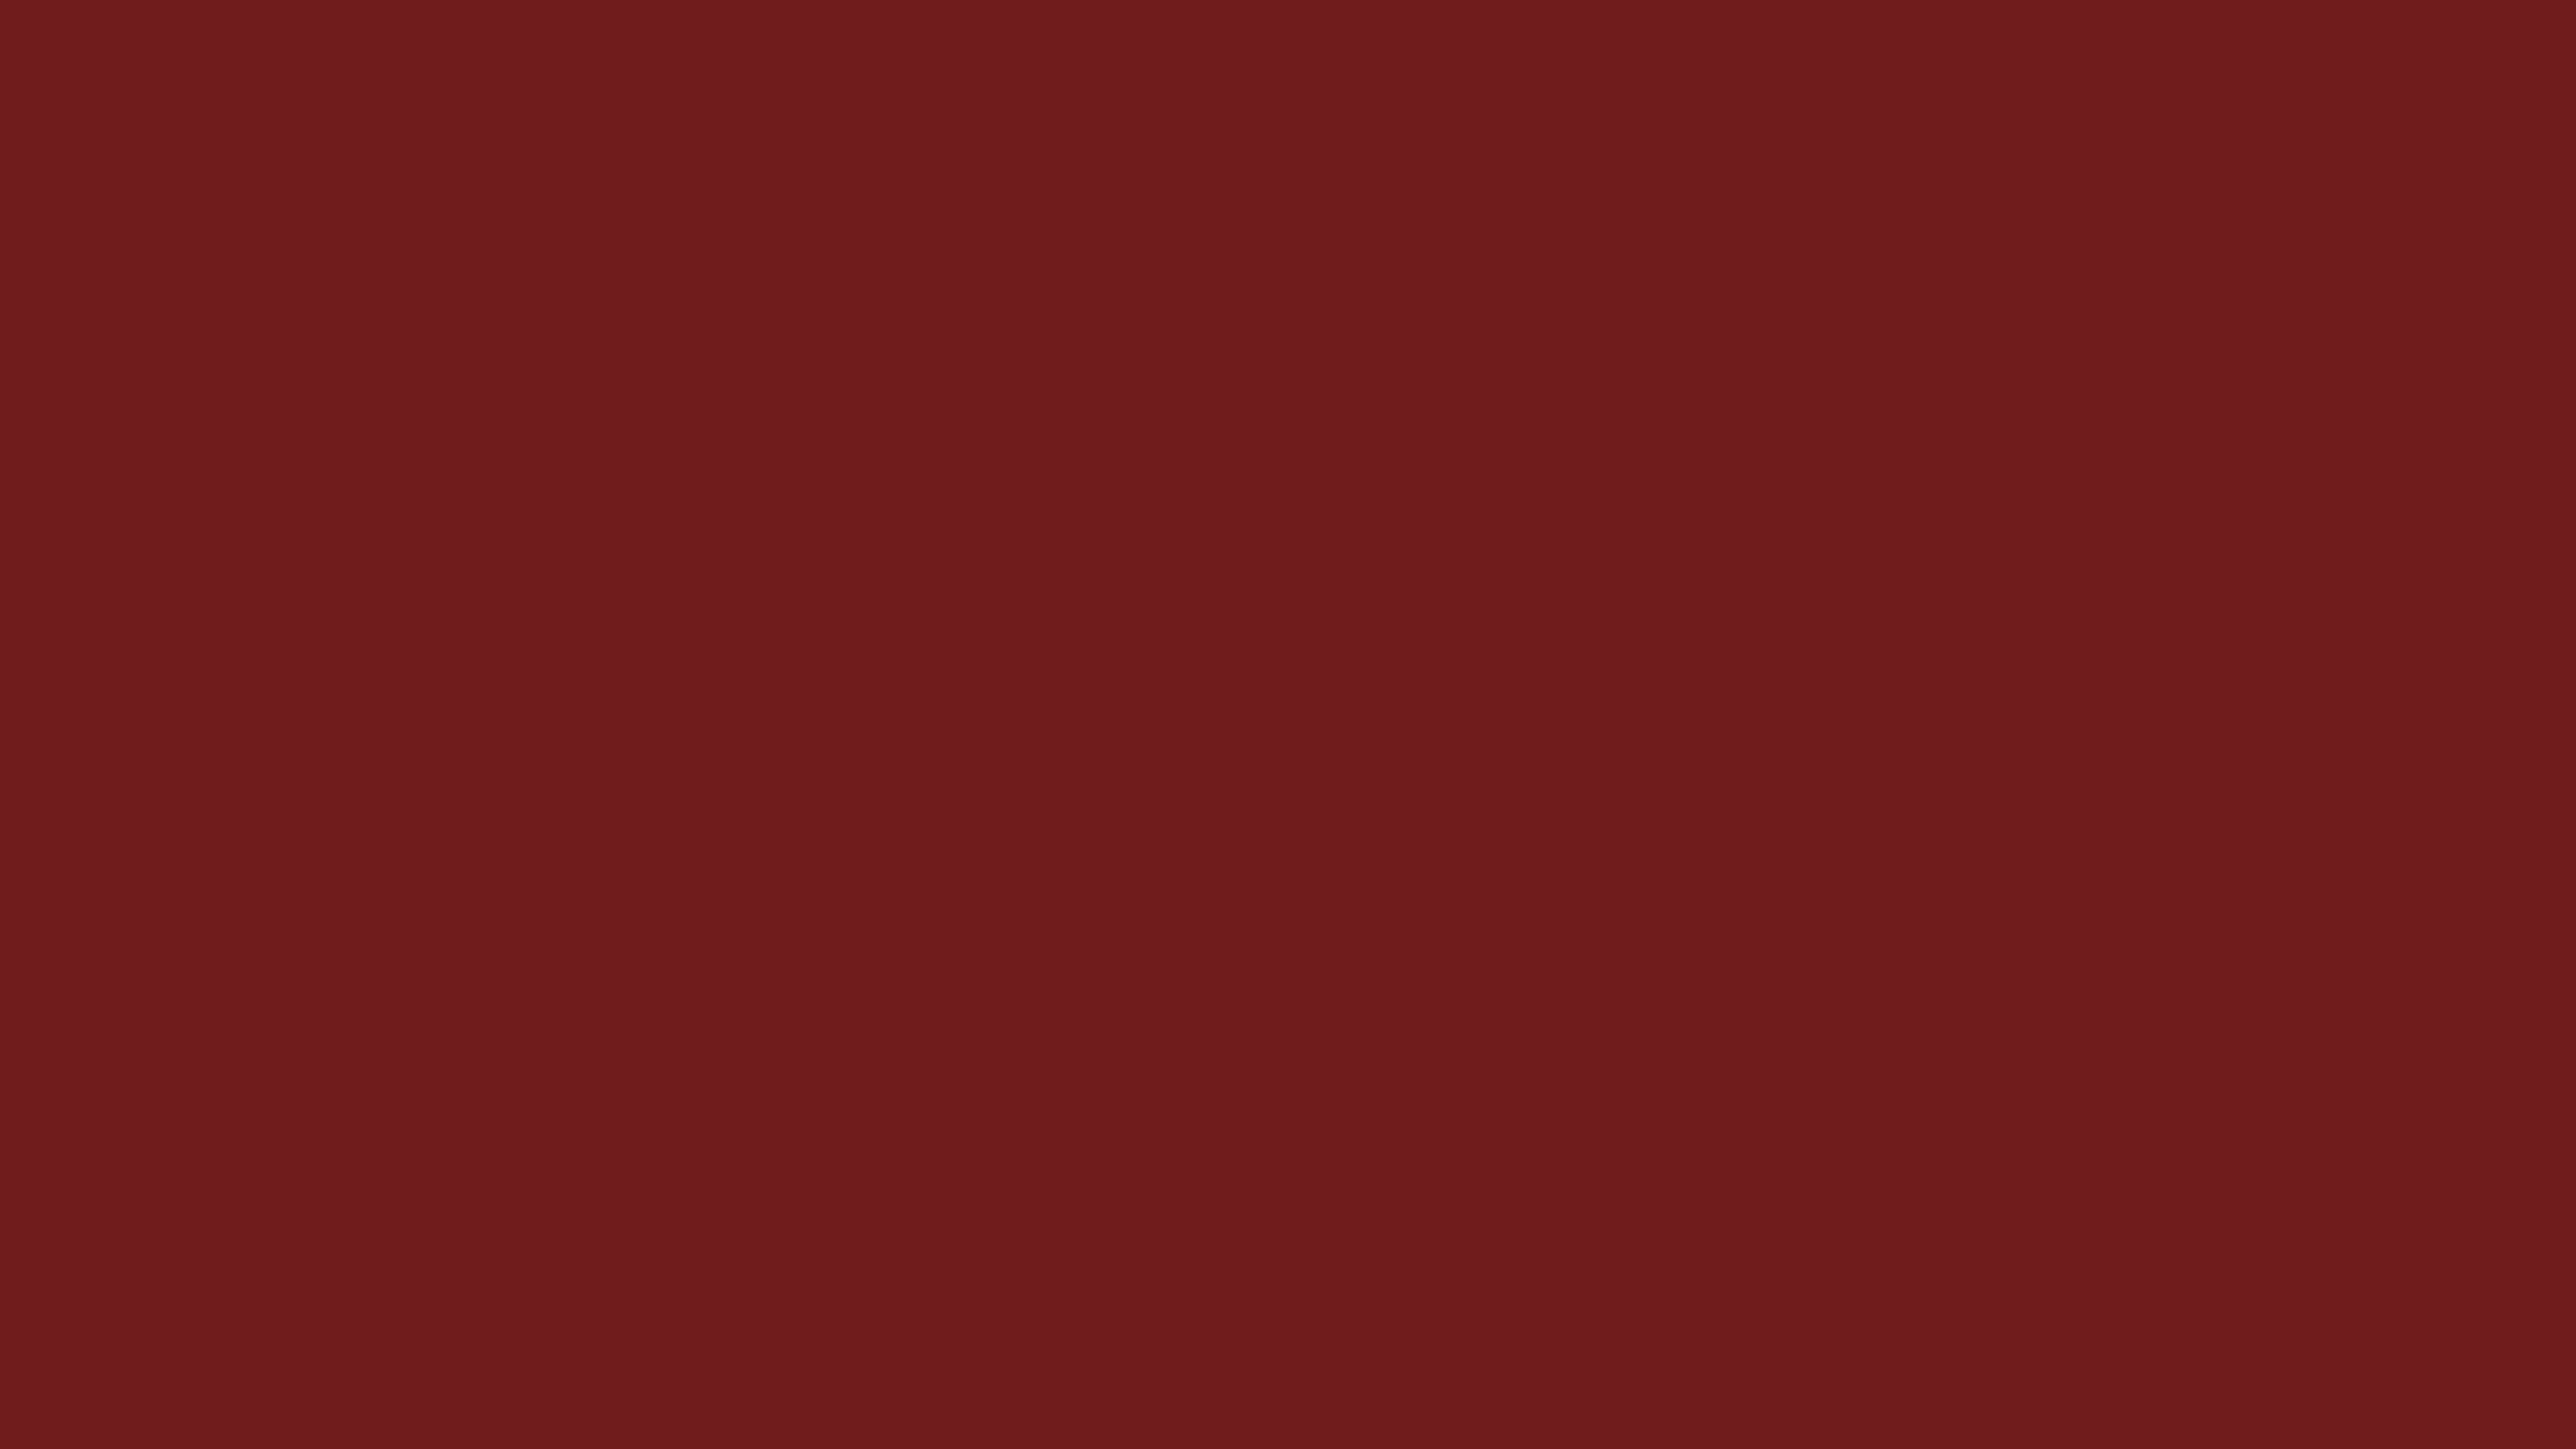 7680x4320 Prune Solid Color Background